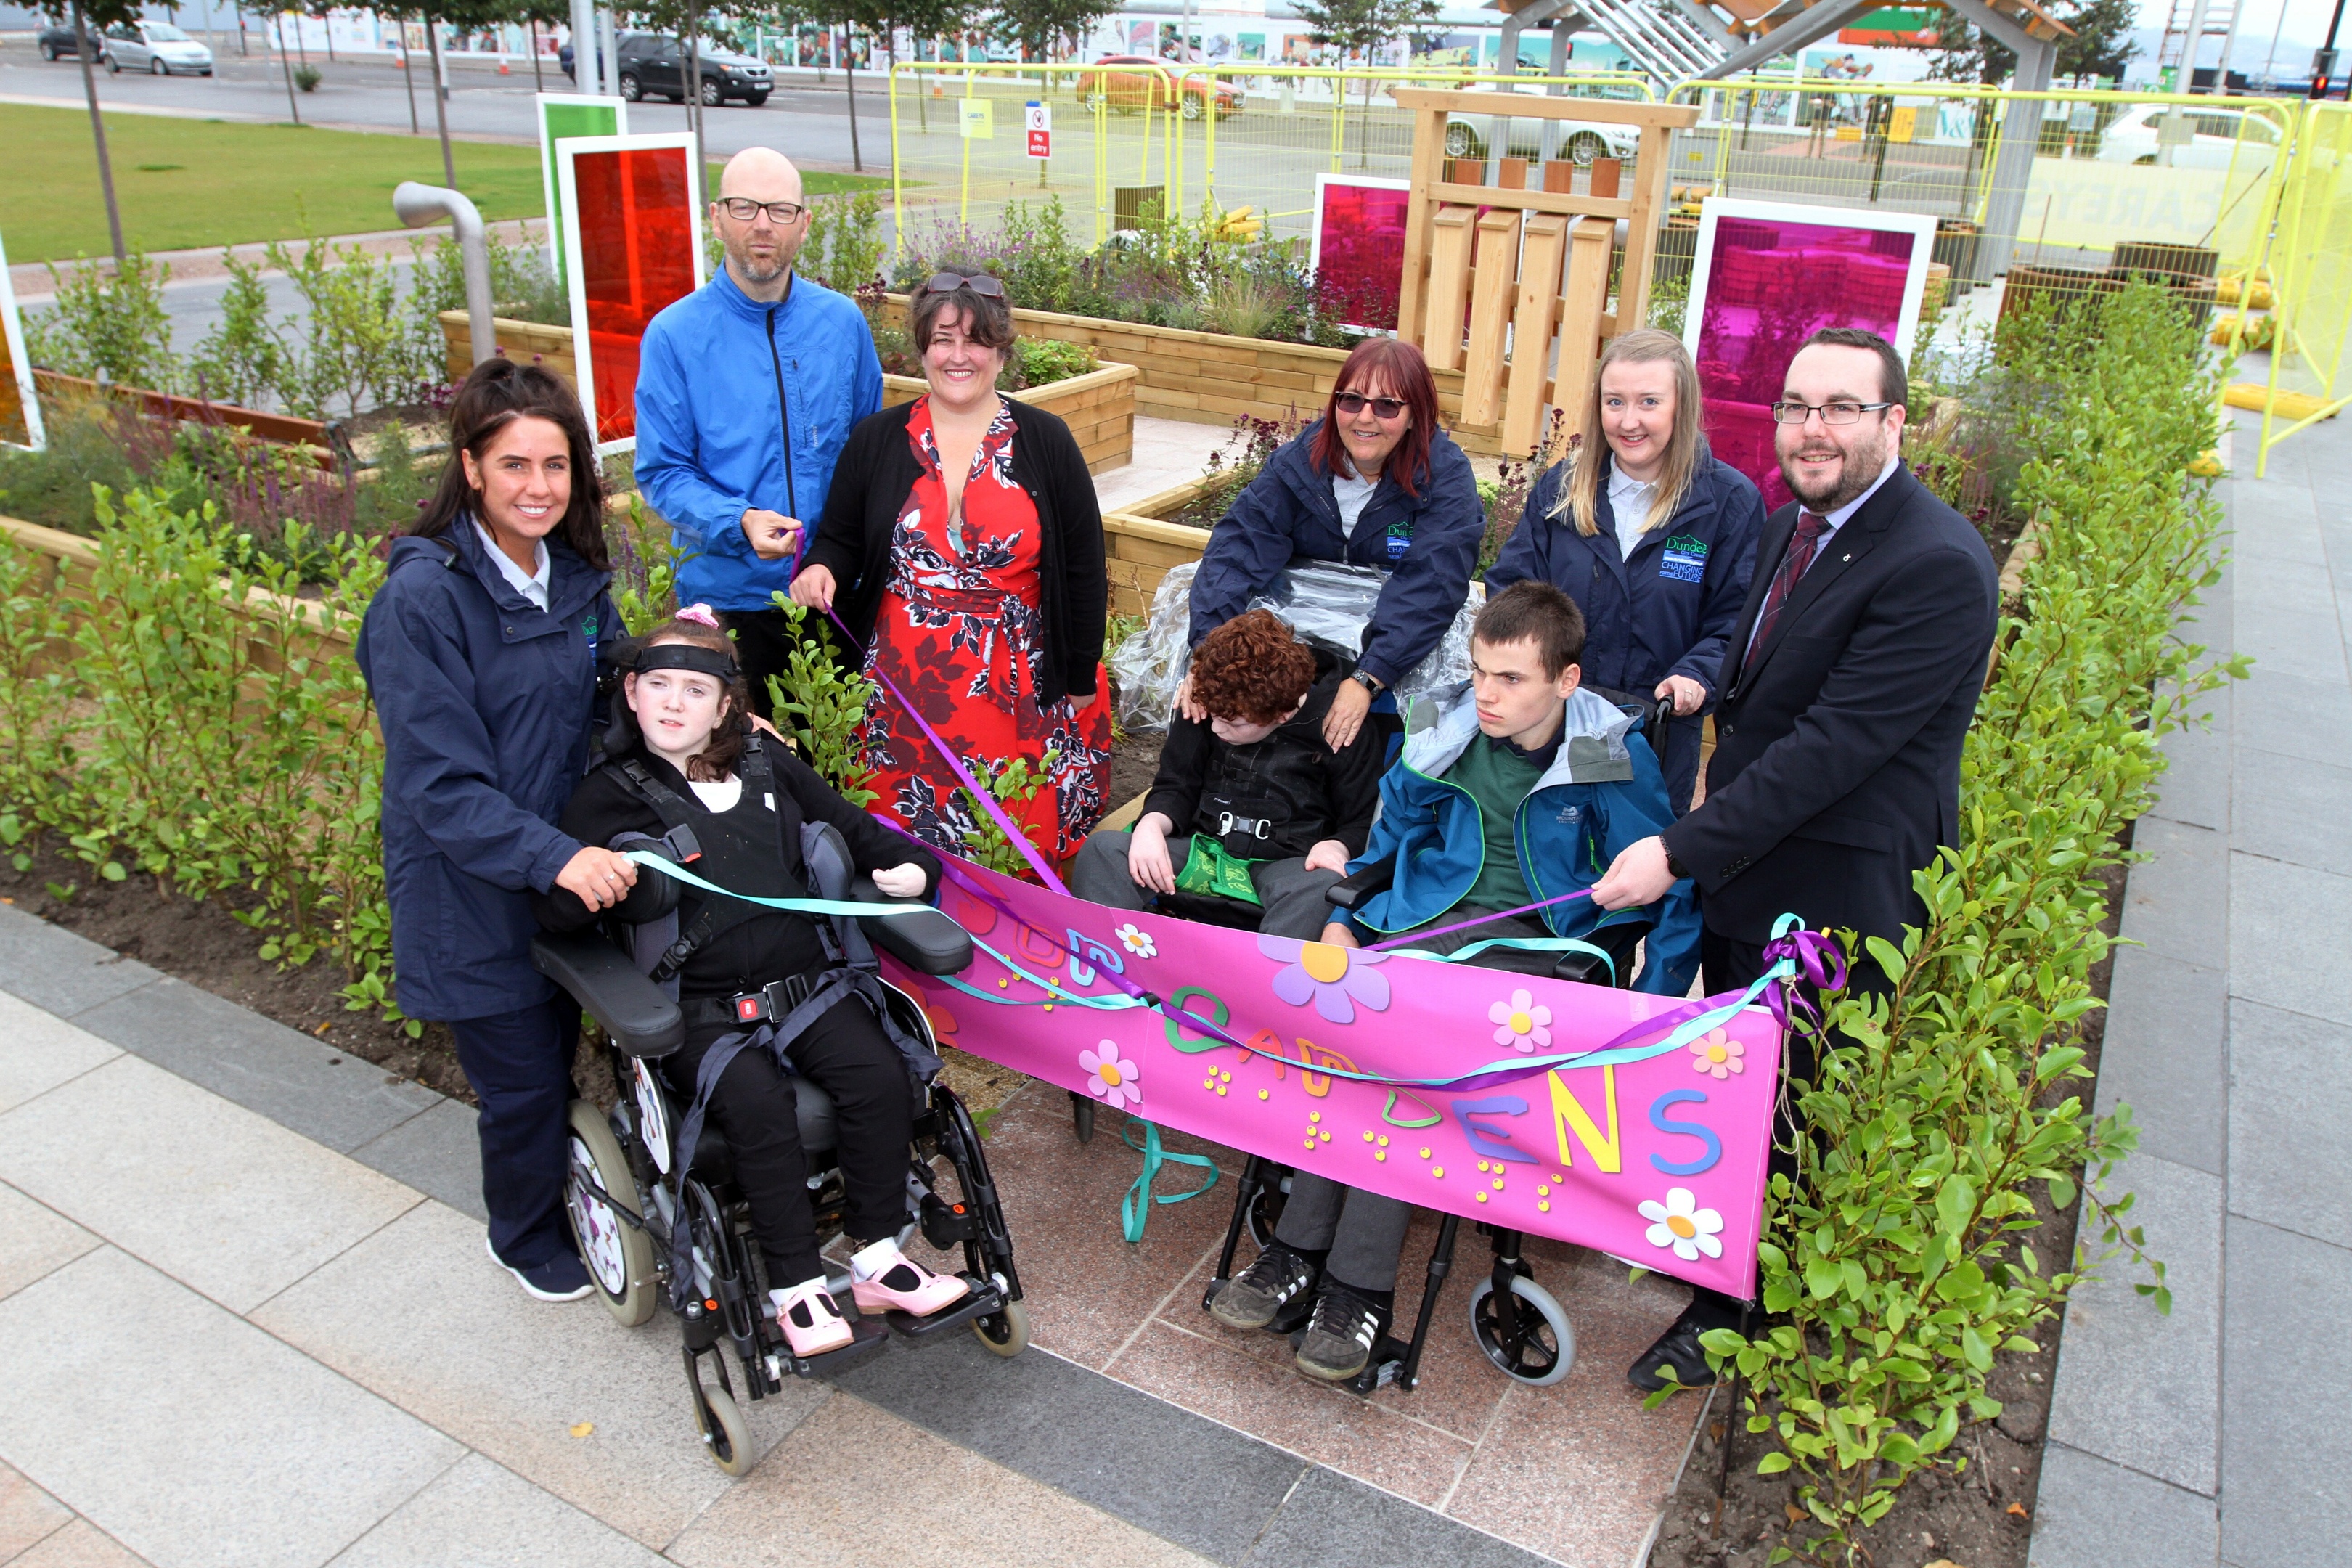 Pupils and teachers from Kingspark School with councillors Lynne Short and Gregor Murray